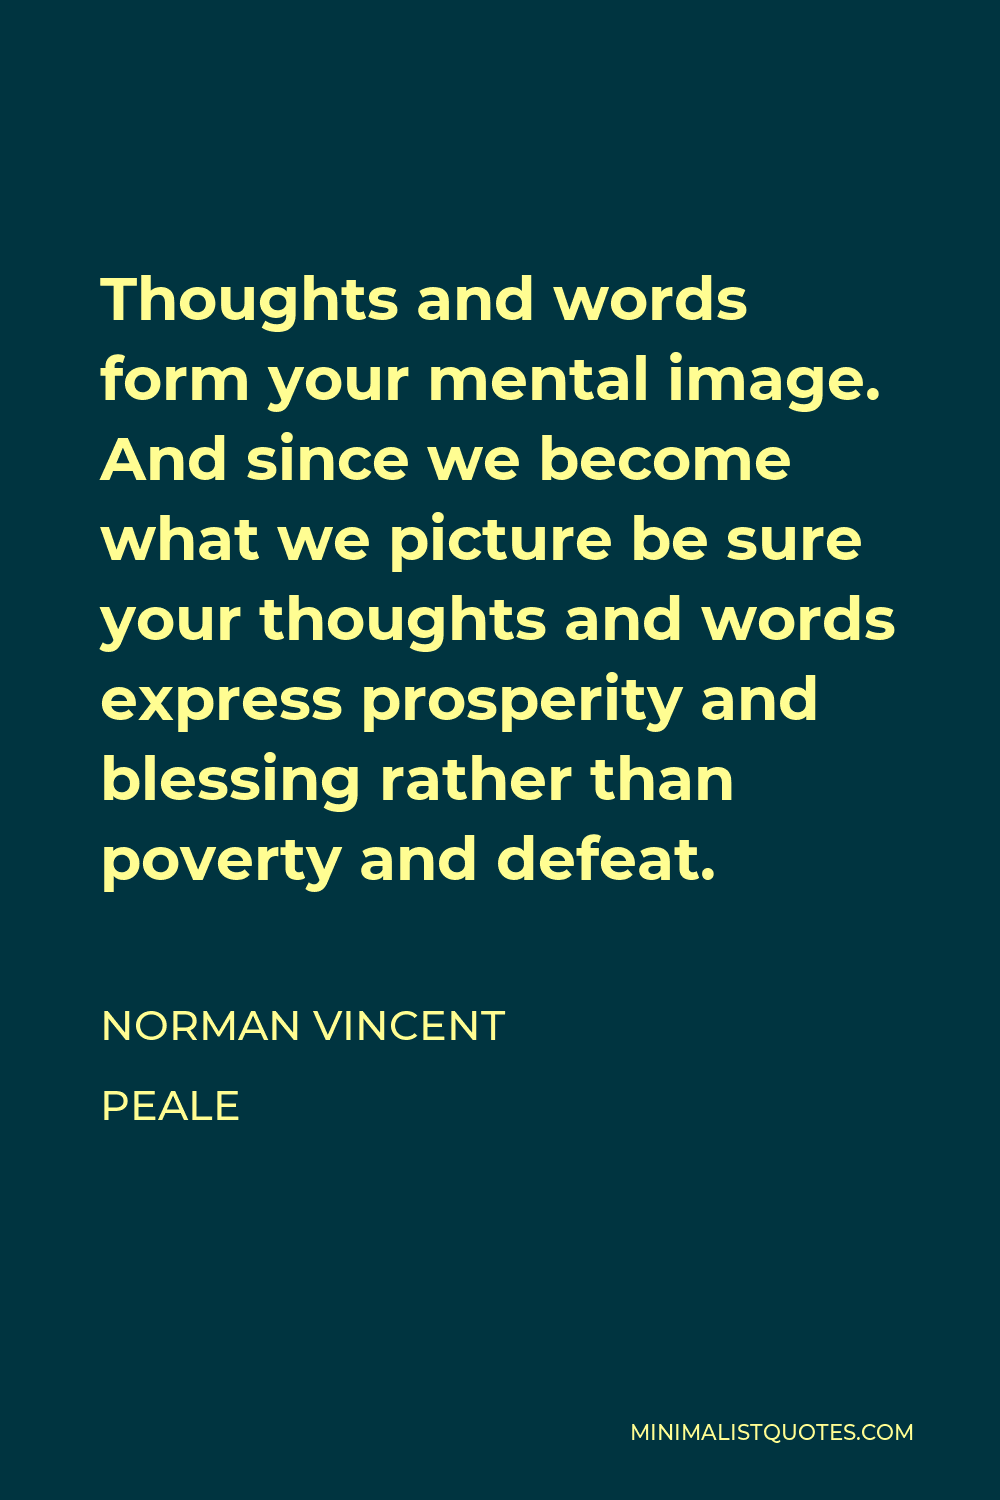 Norman Vincent Peale Quote - Thoughts and words form your mental image. And since we become what we picture be sure your thoughts and words express prosperity and blessing rather than poverty and defeat.